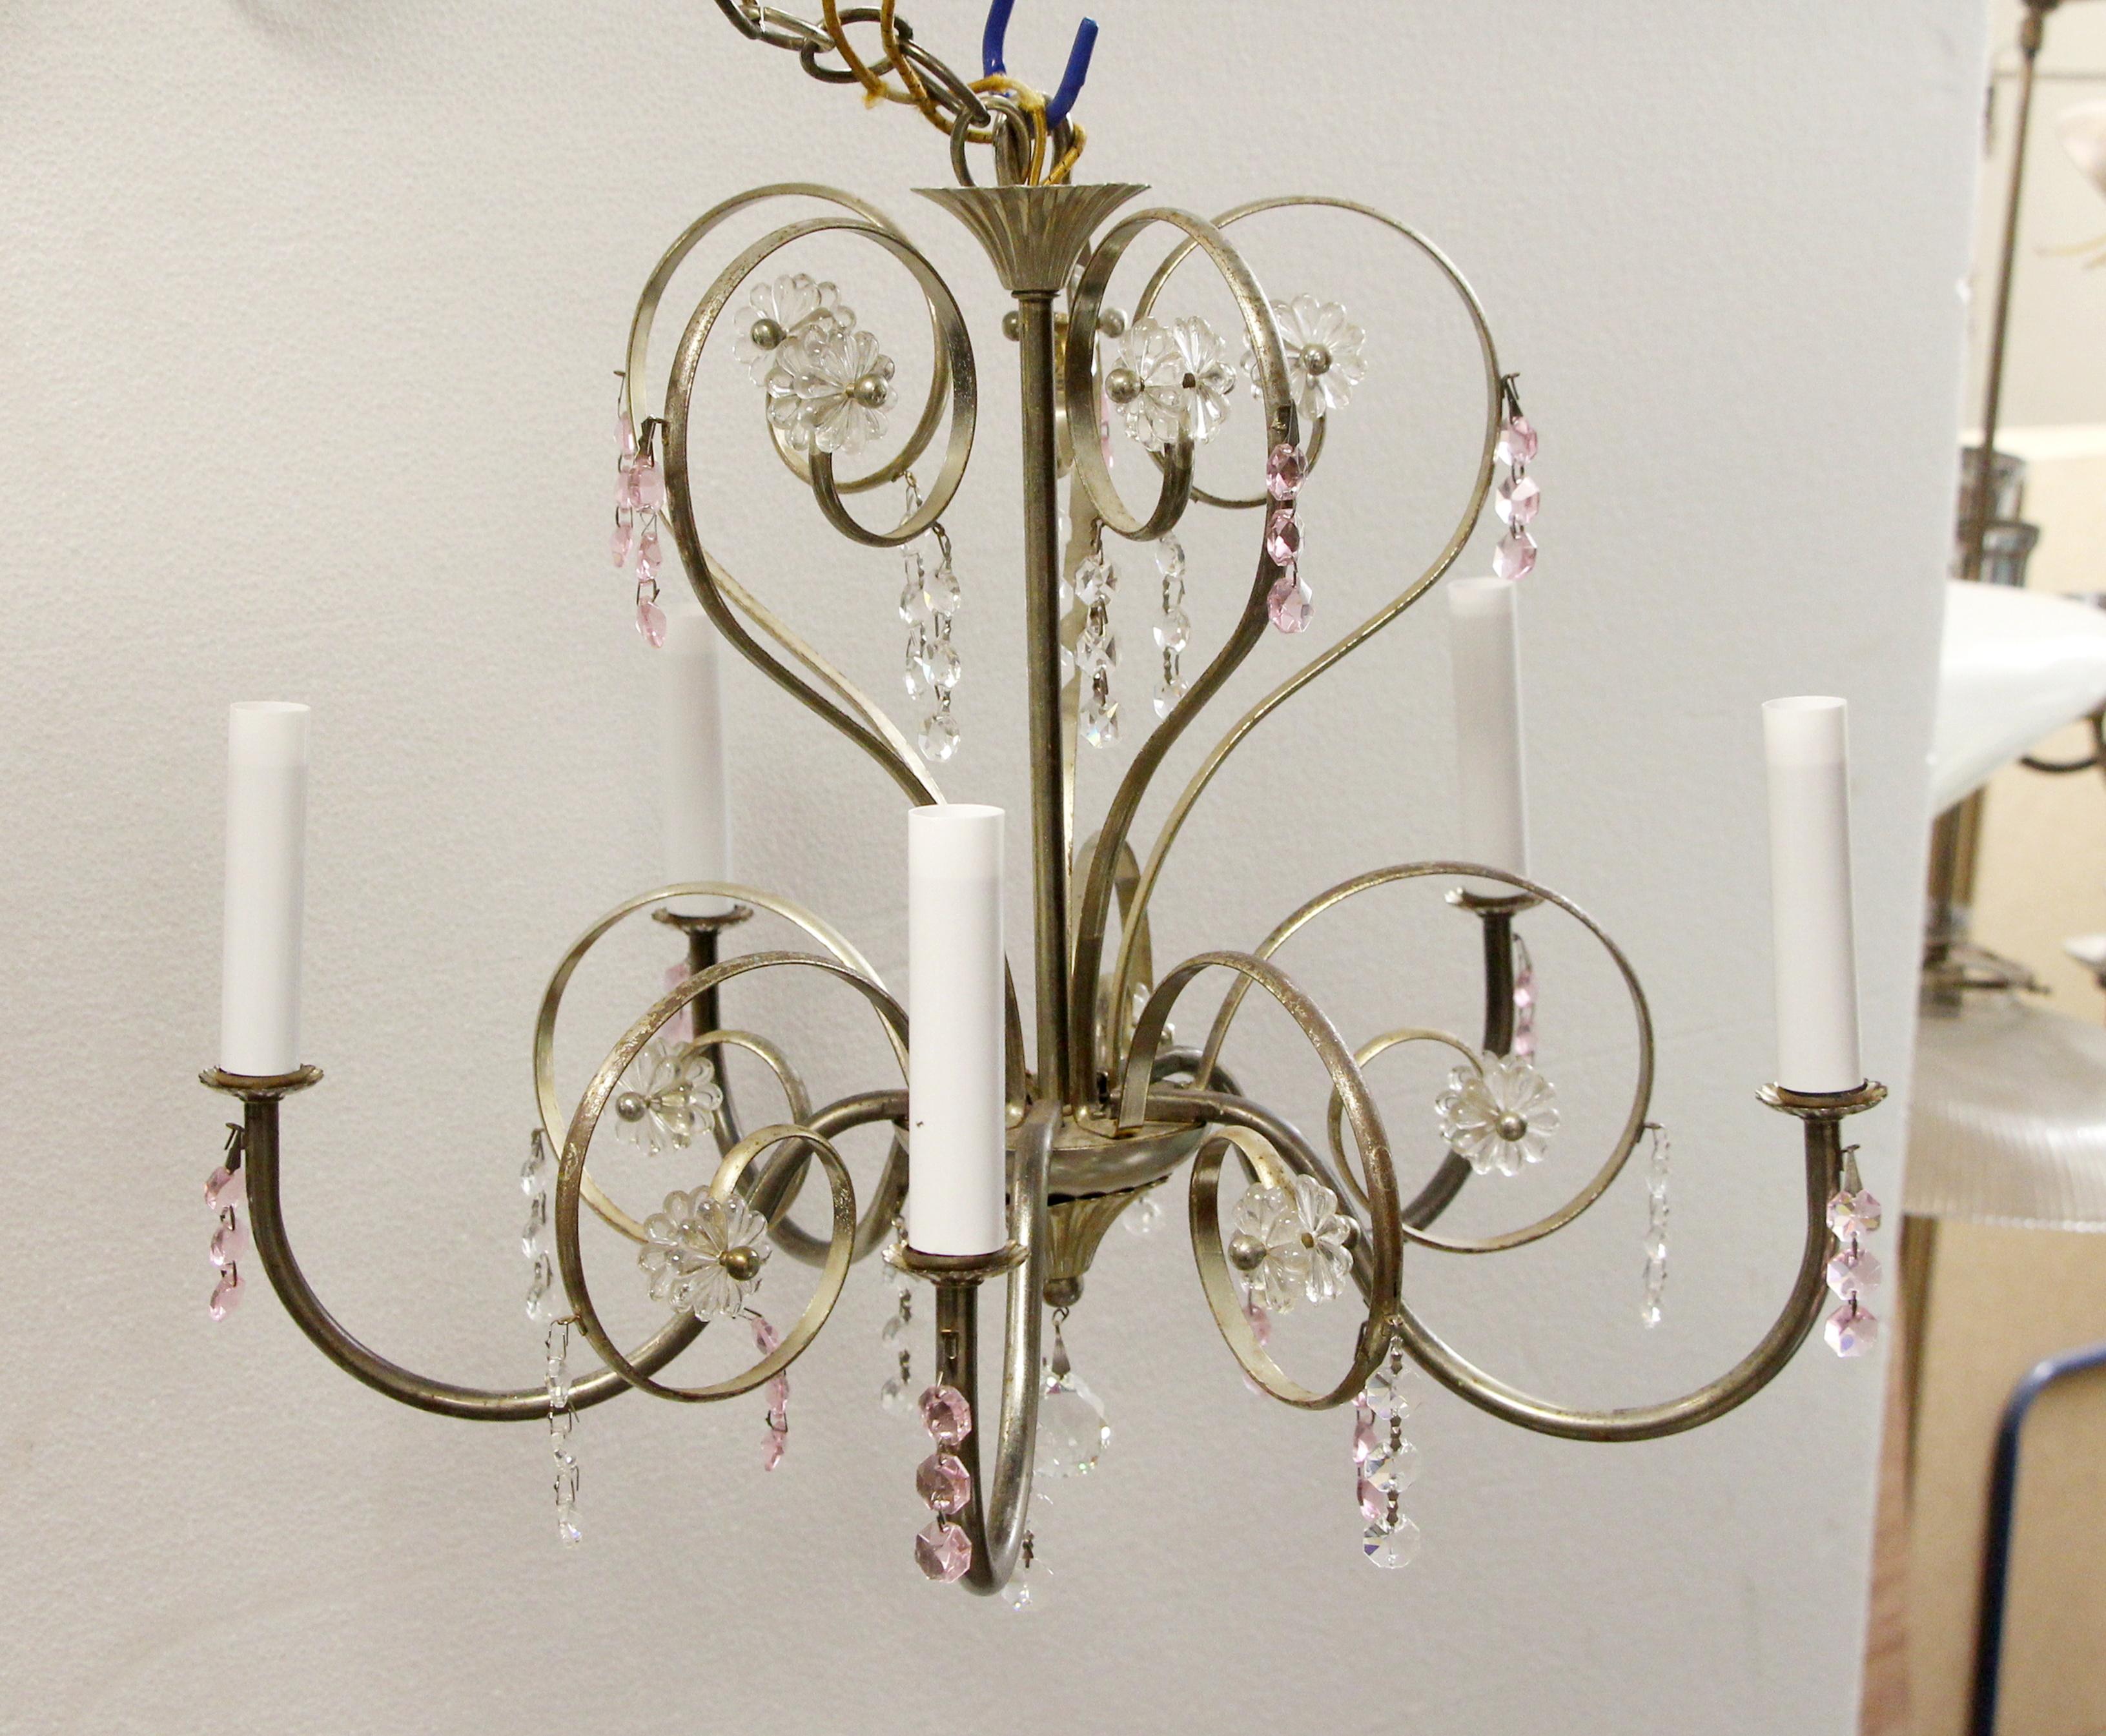 1990s nickel-plated five-arm chandelier with clear floret details and pink and clear crystal accents. Please note, this item is located in our Scranton, PA location.